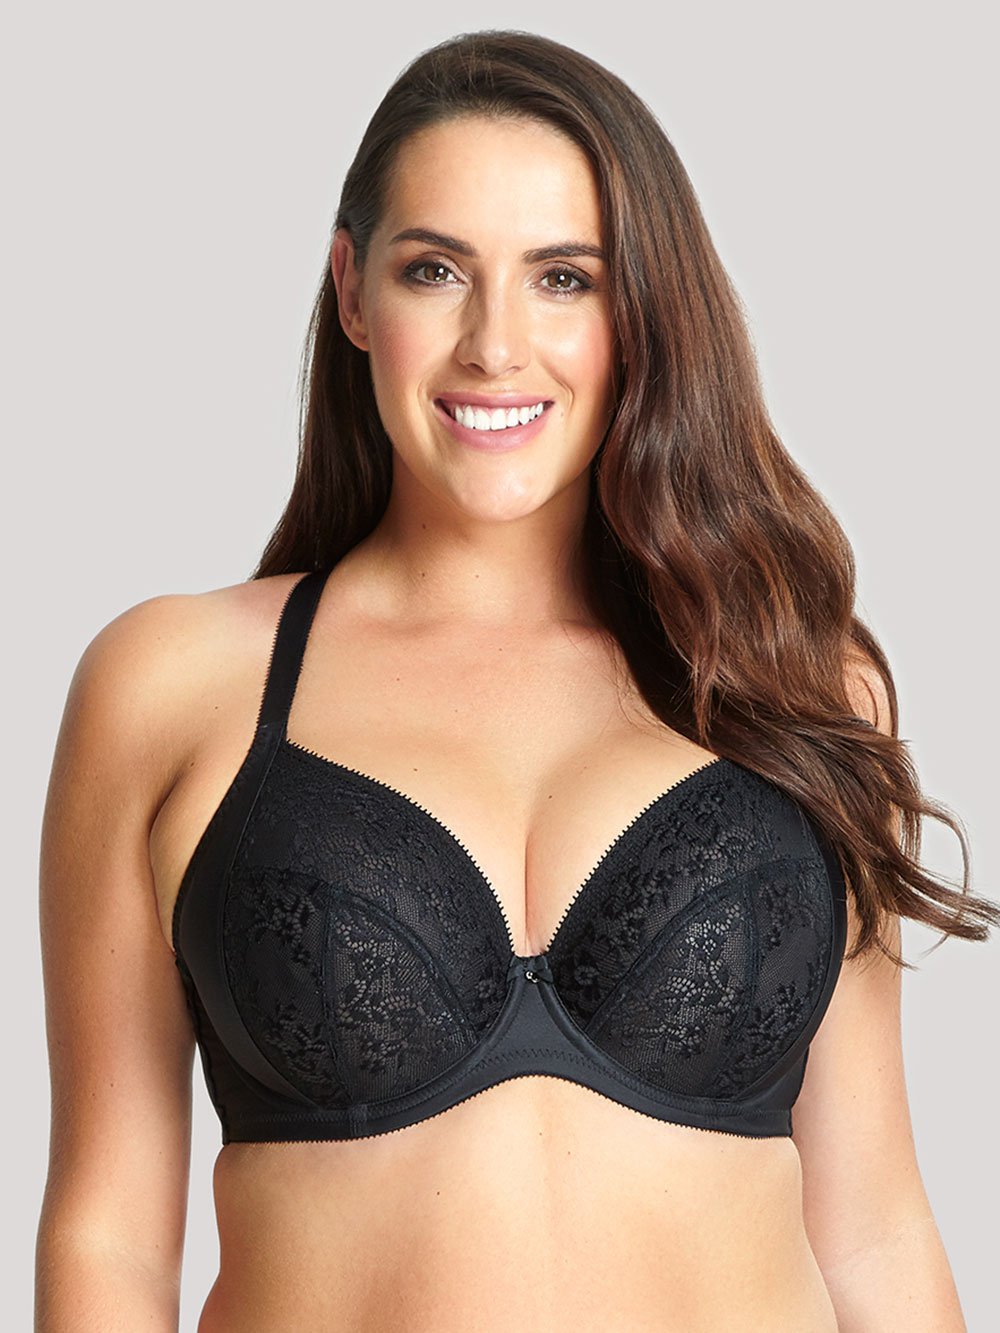 Wholesale 34b breast size images - Offering Lingerie For The Curvy Lady 